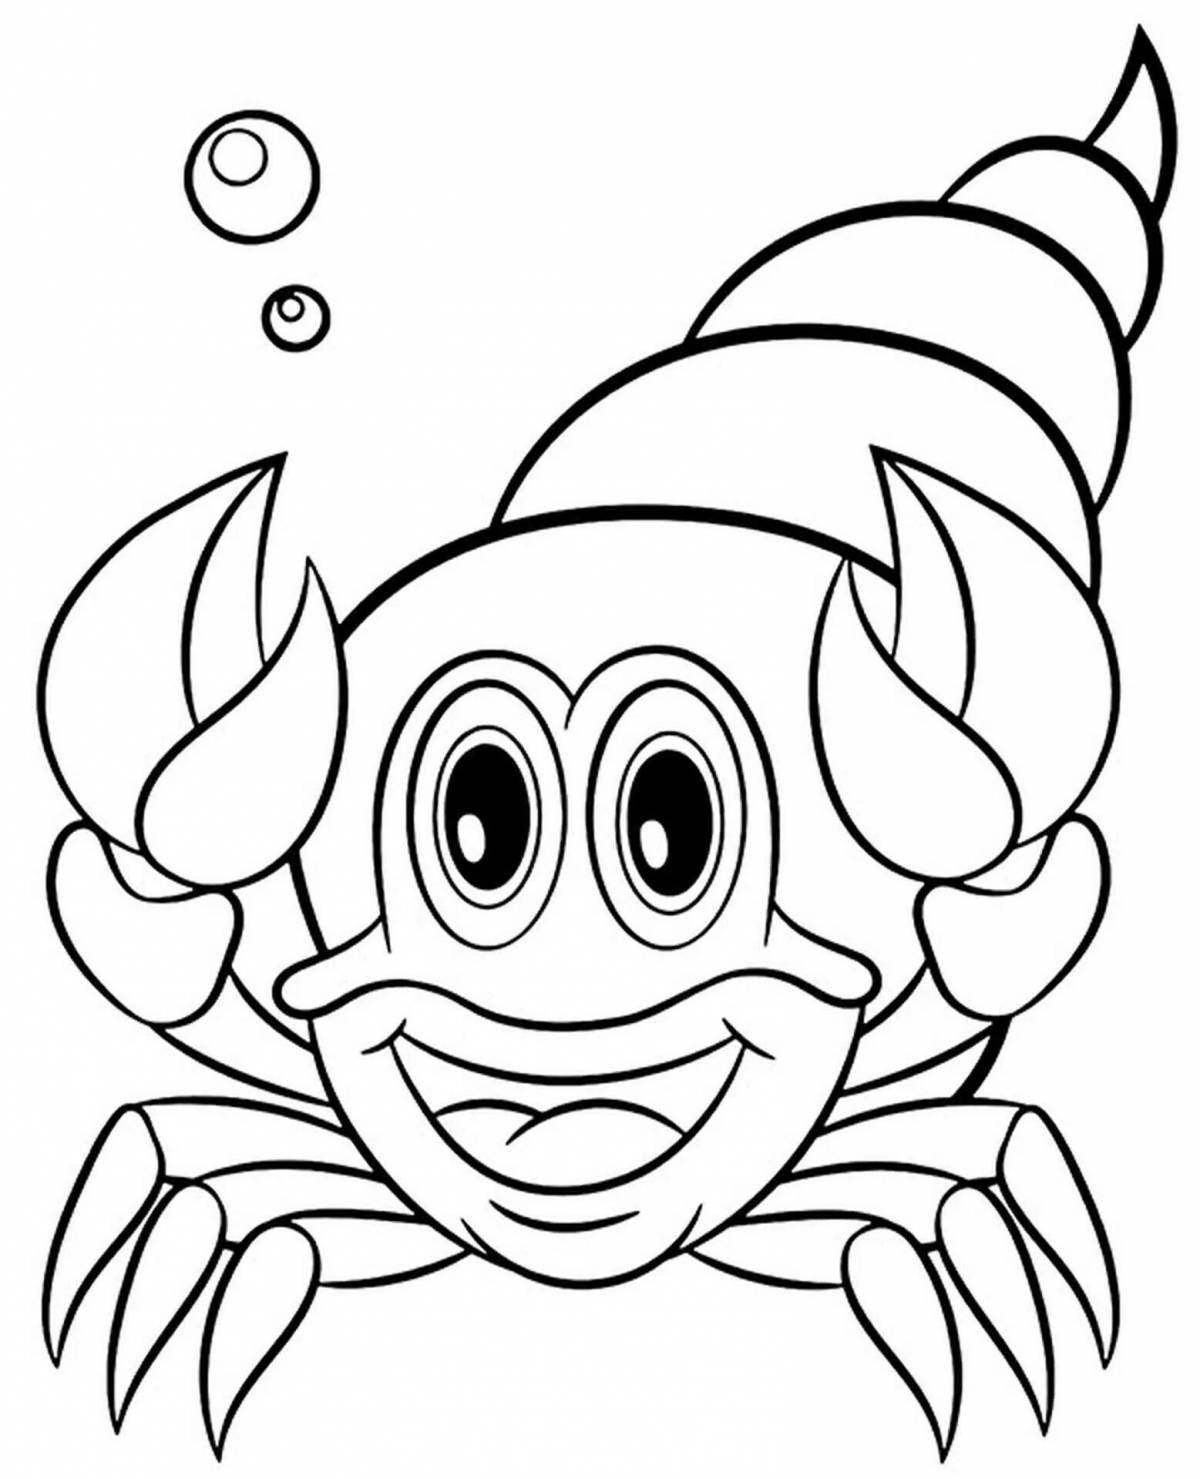 Coloring page cheerful captain crab